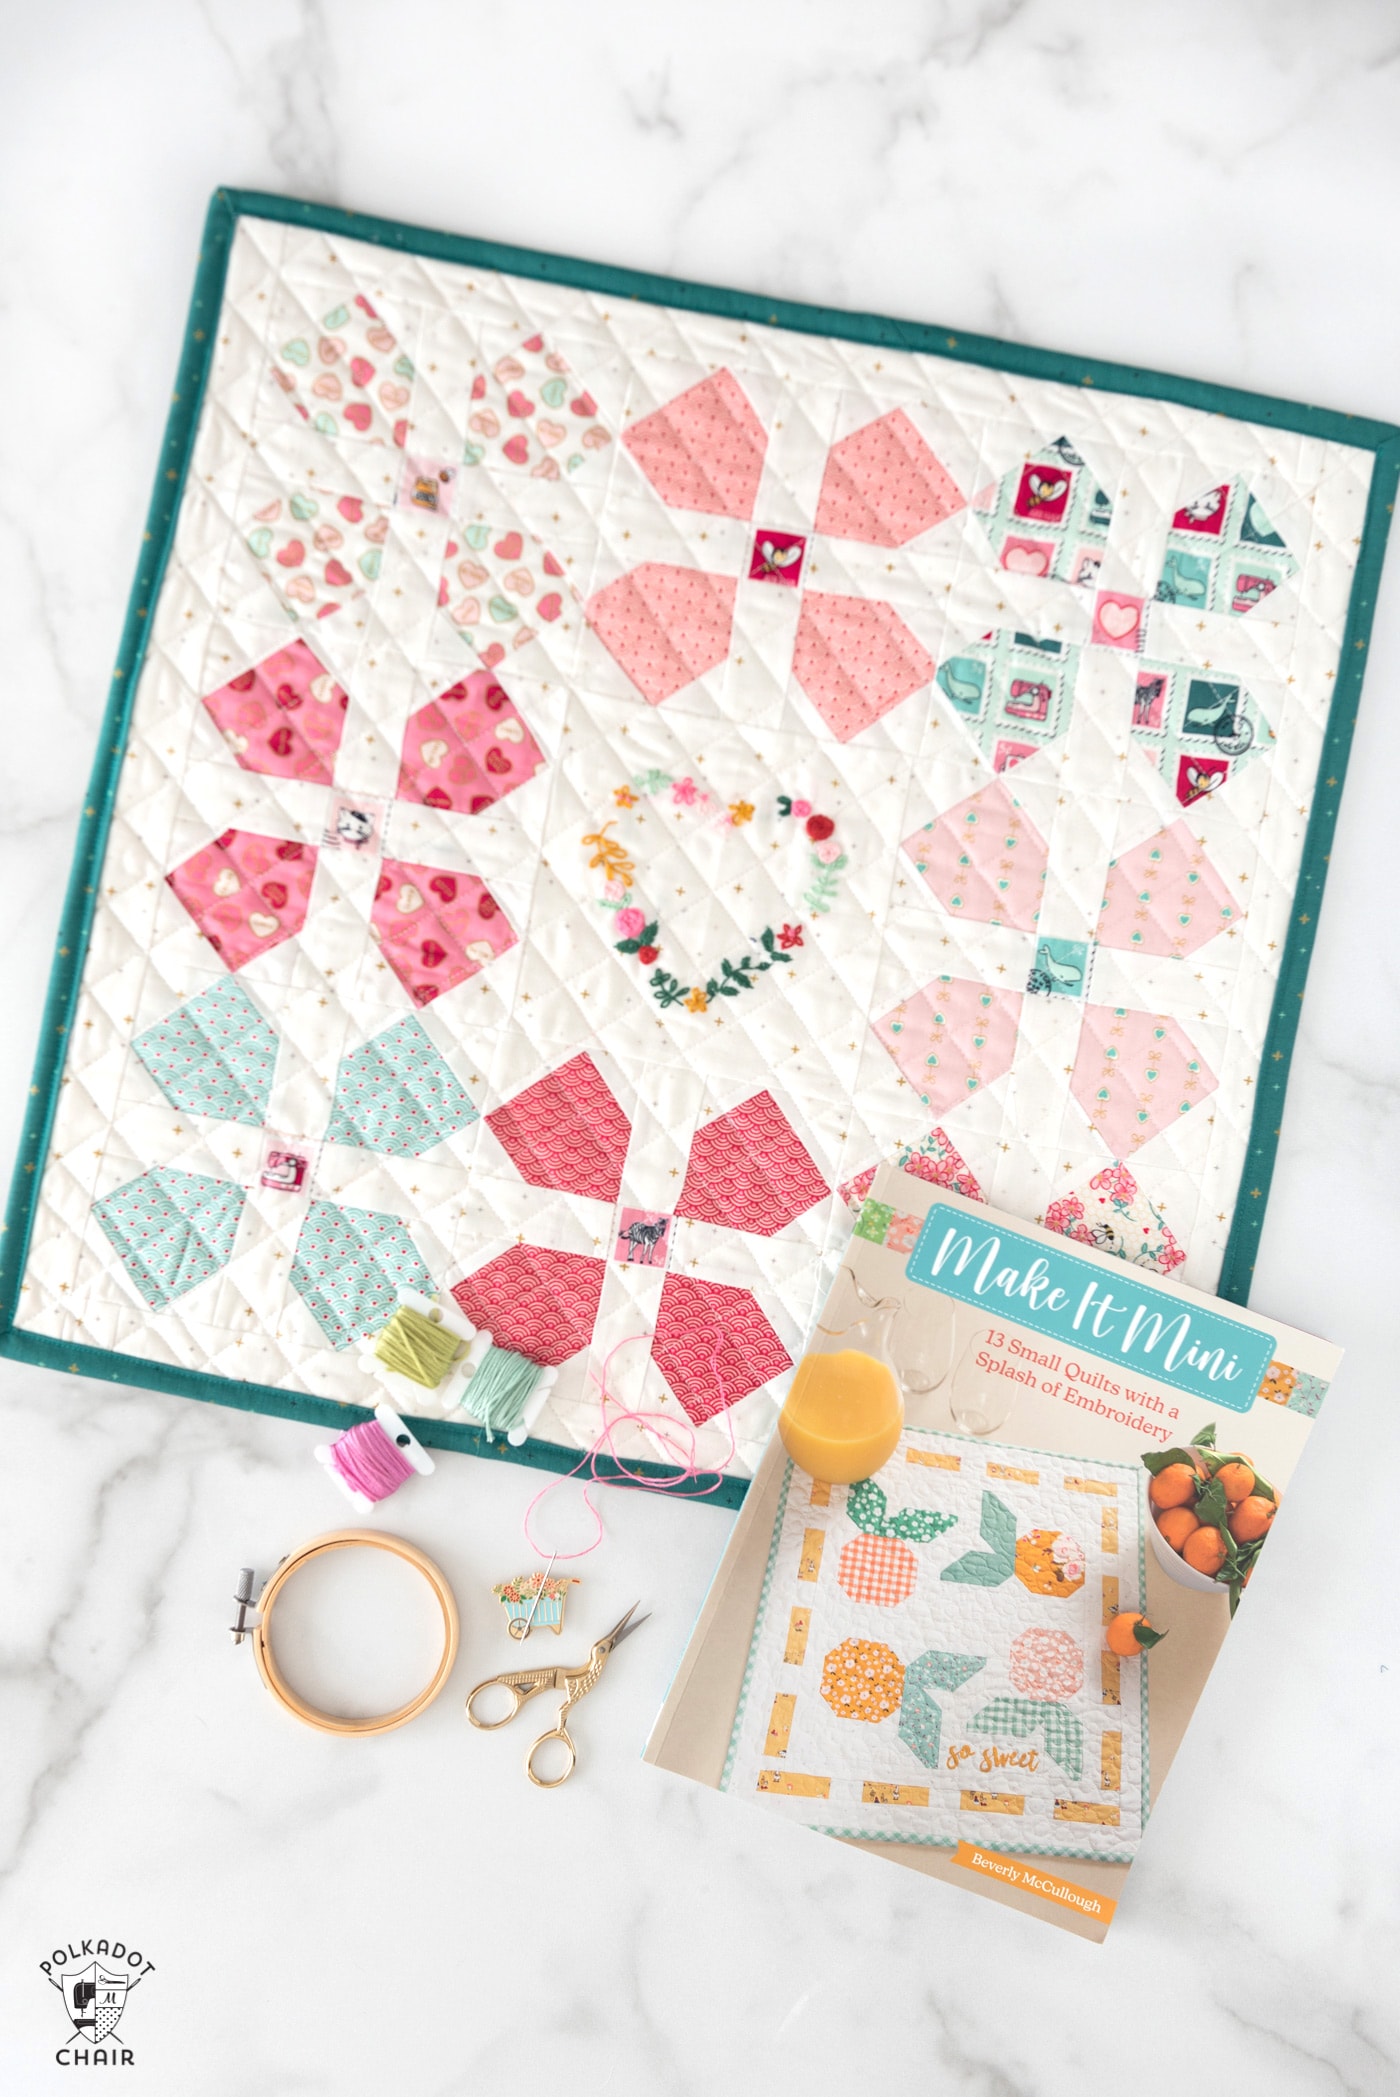 Mini quilt, book and sewing notions on white tabletop